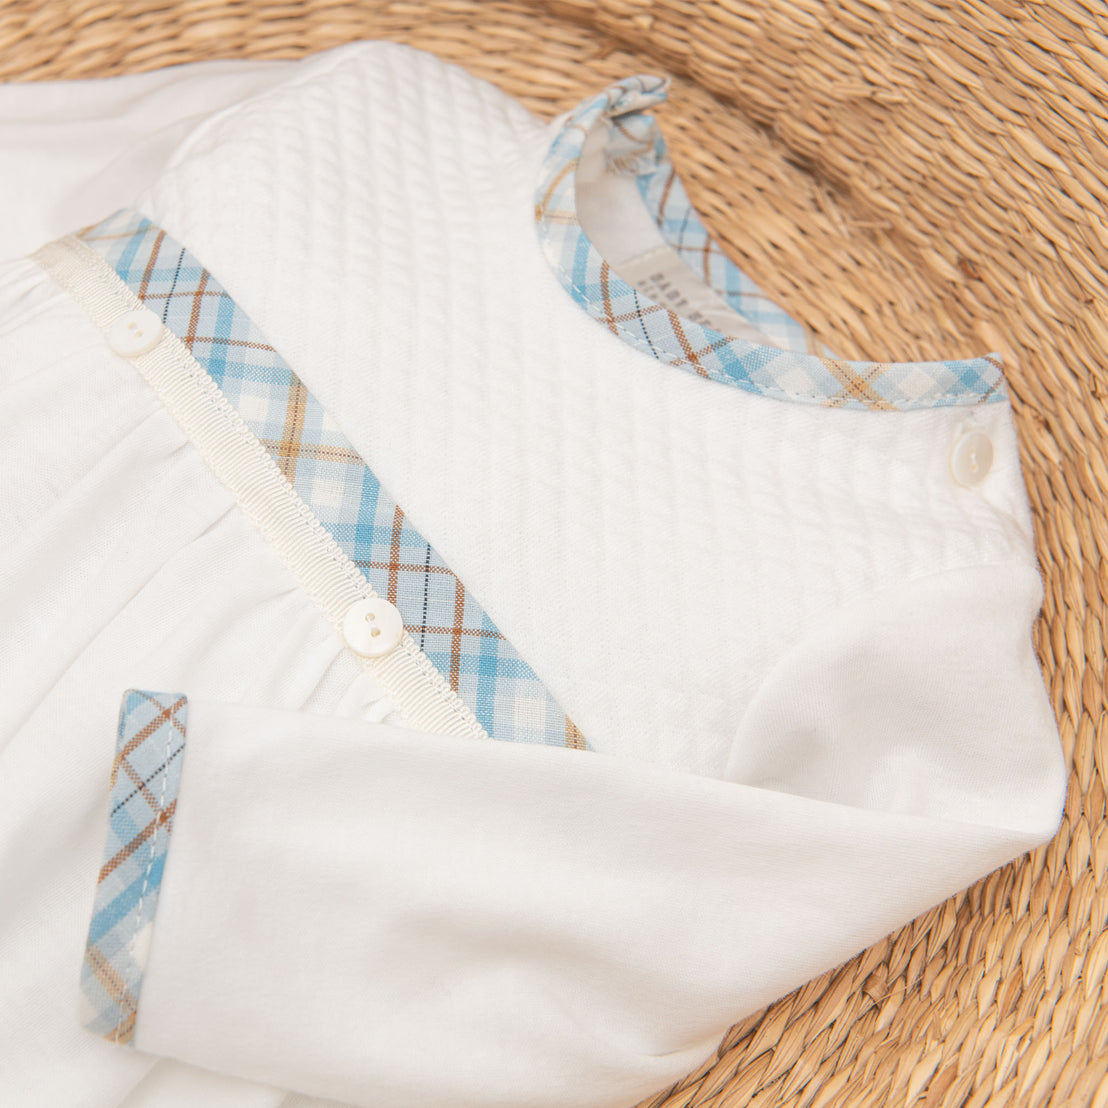 An upscale Mason Newborn Gown with plaid blue trim, perfect for a baptism, featuring heirloom-quality button snaps and a soft texture.